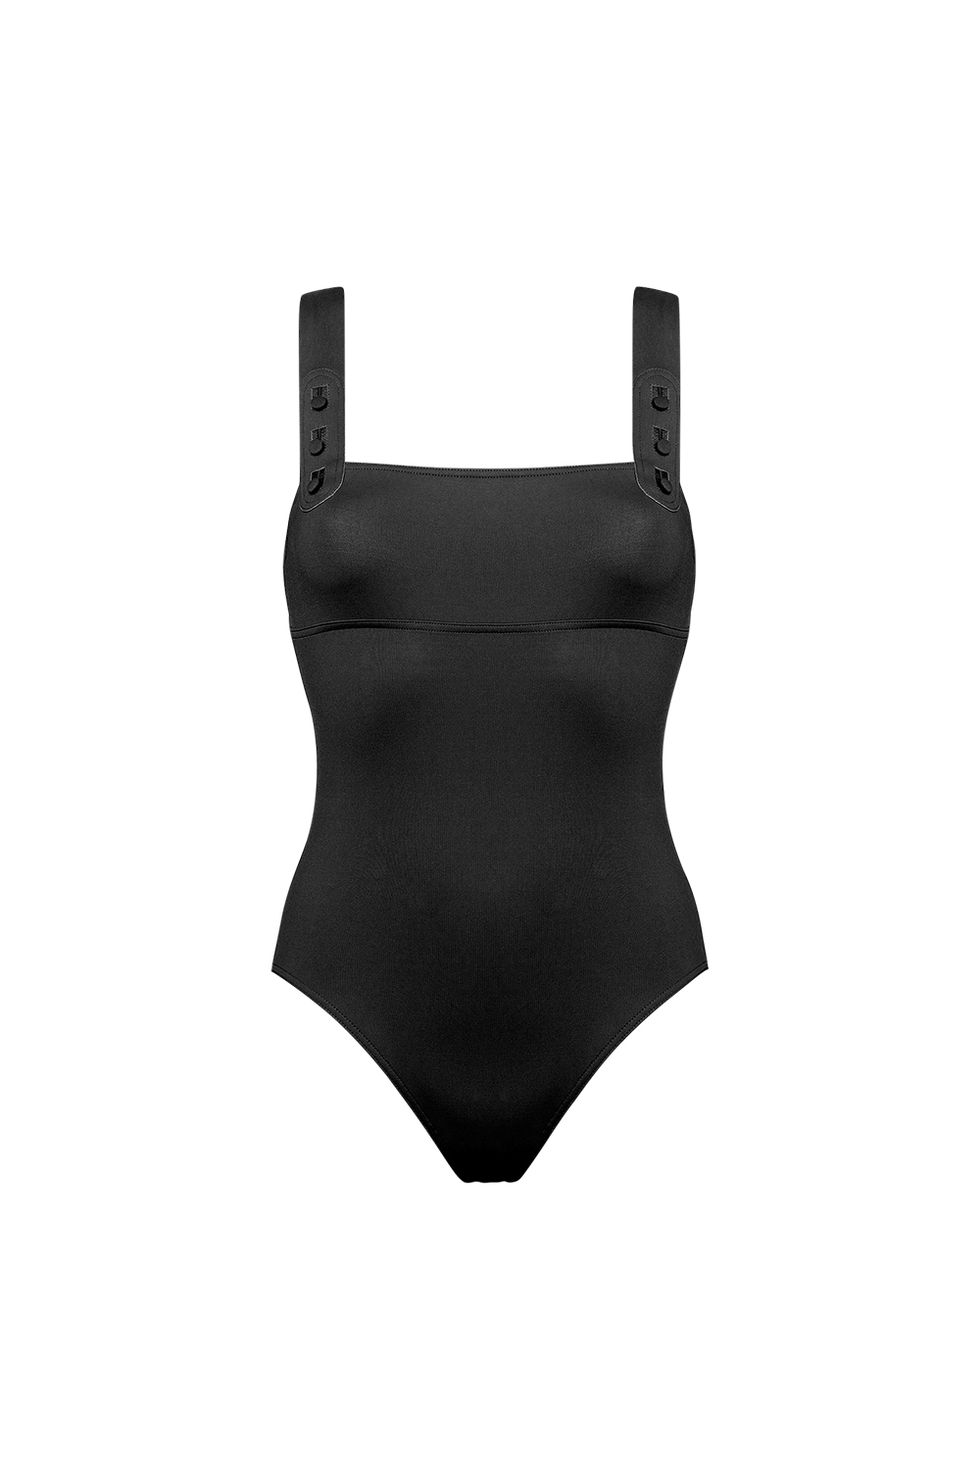 <p>We all know a black one-piece is superchic and practical—but I like the newness of this straight-across square neckline. Wider straps mask the tricky armpit area, but also give this more of a bodysuit shape, perfect with high-waisted denim shorts when I'm chasing my toddler around.</p><p><em data-redactor-tag="em" data-verified="redactor">Polyamide spandex swimsuit, ERES, $560, collection at net-a-porter.com</em></p>